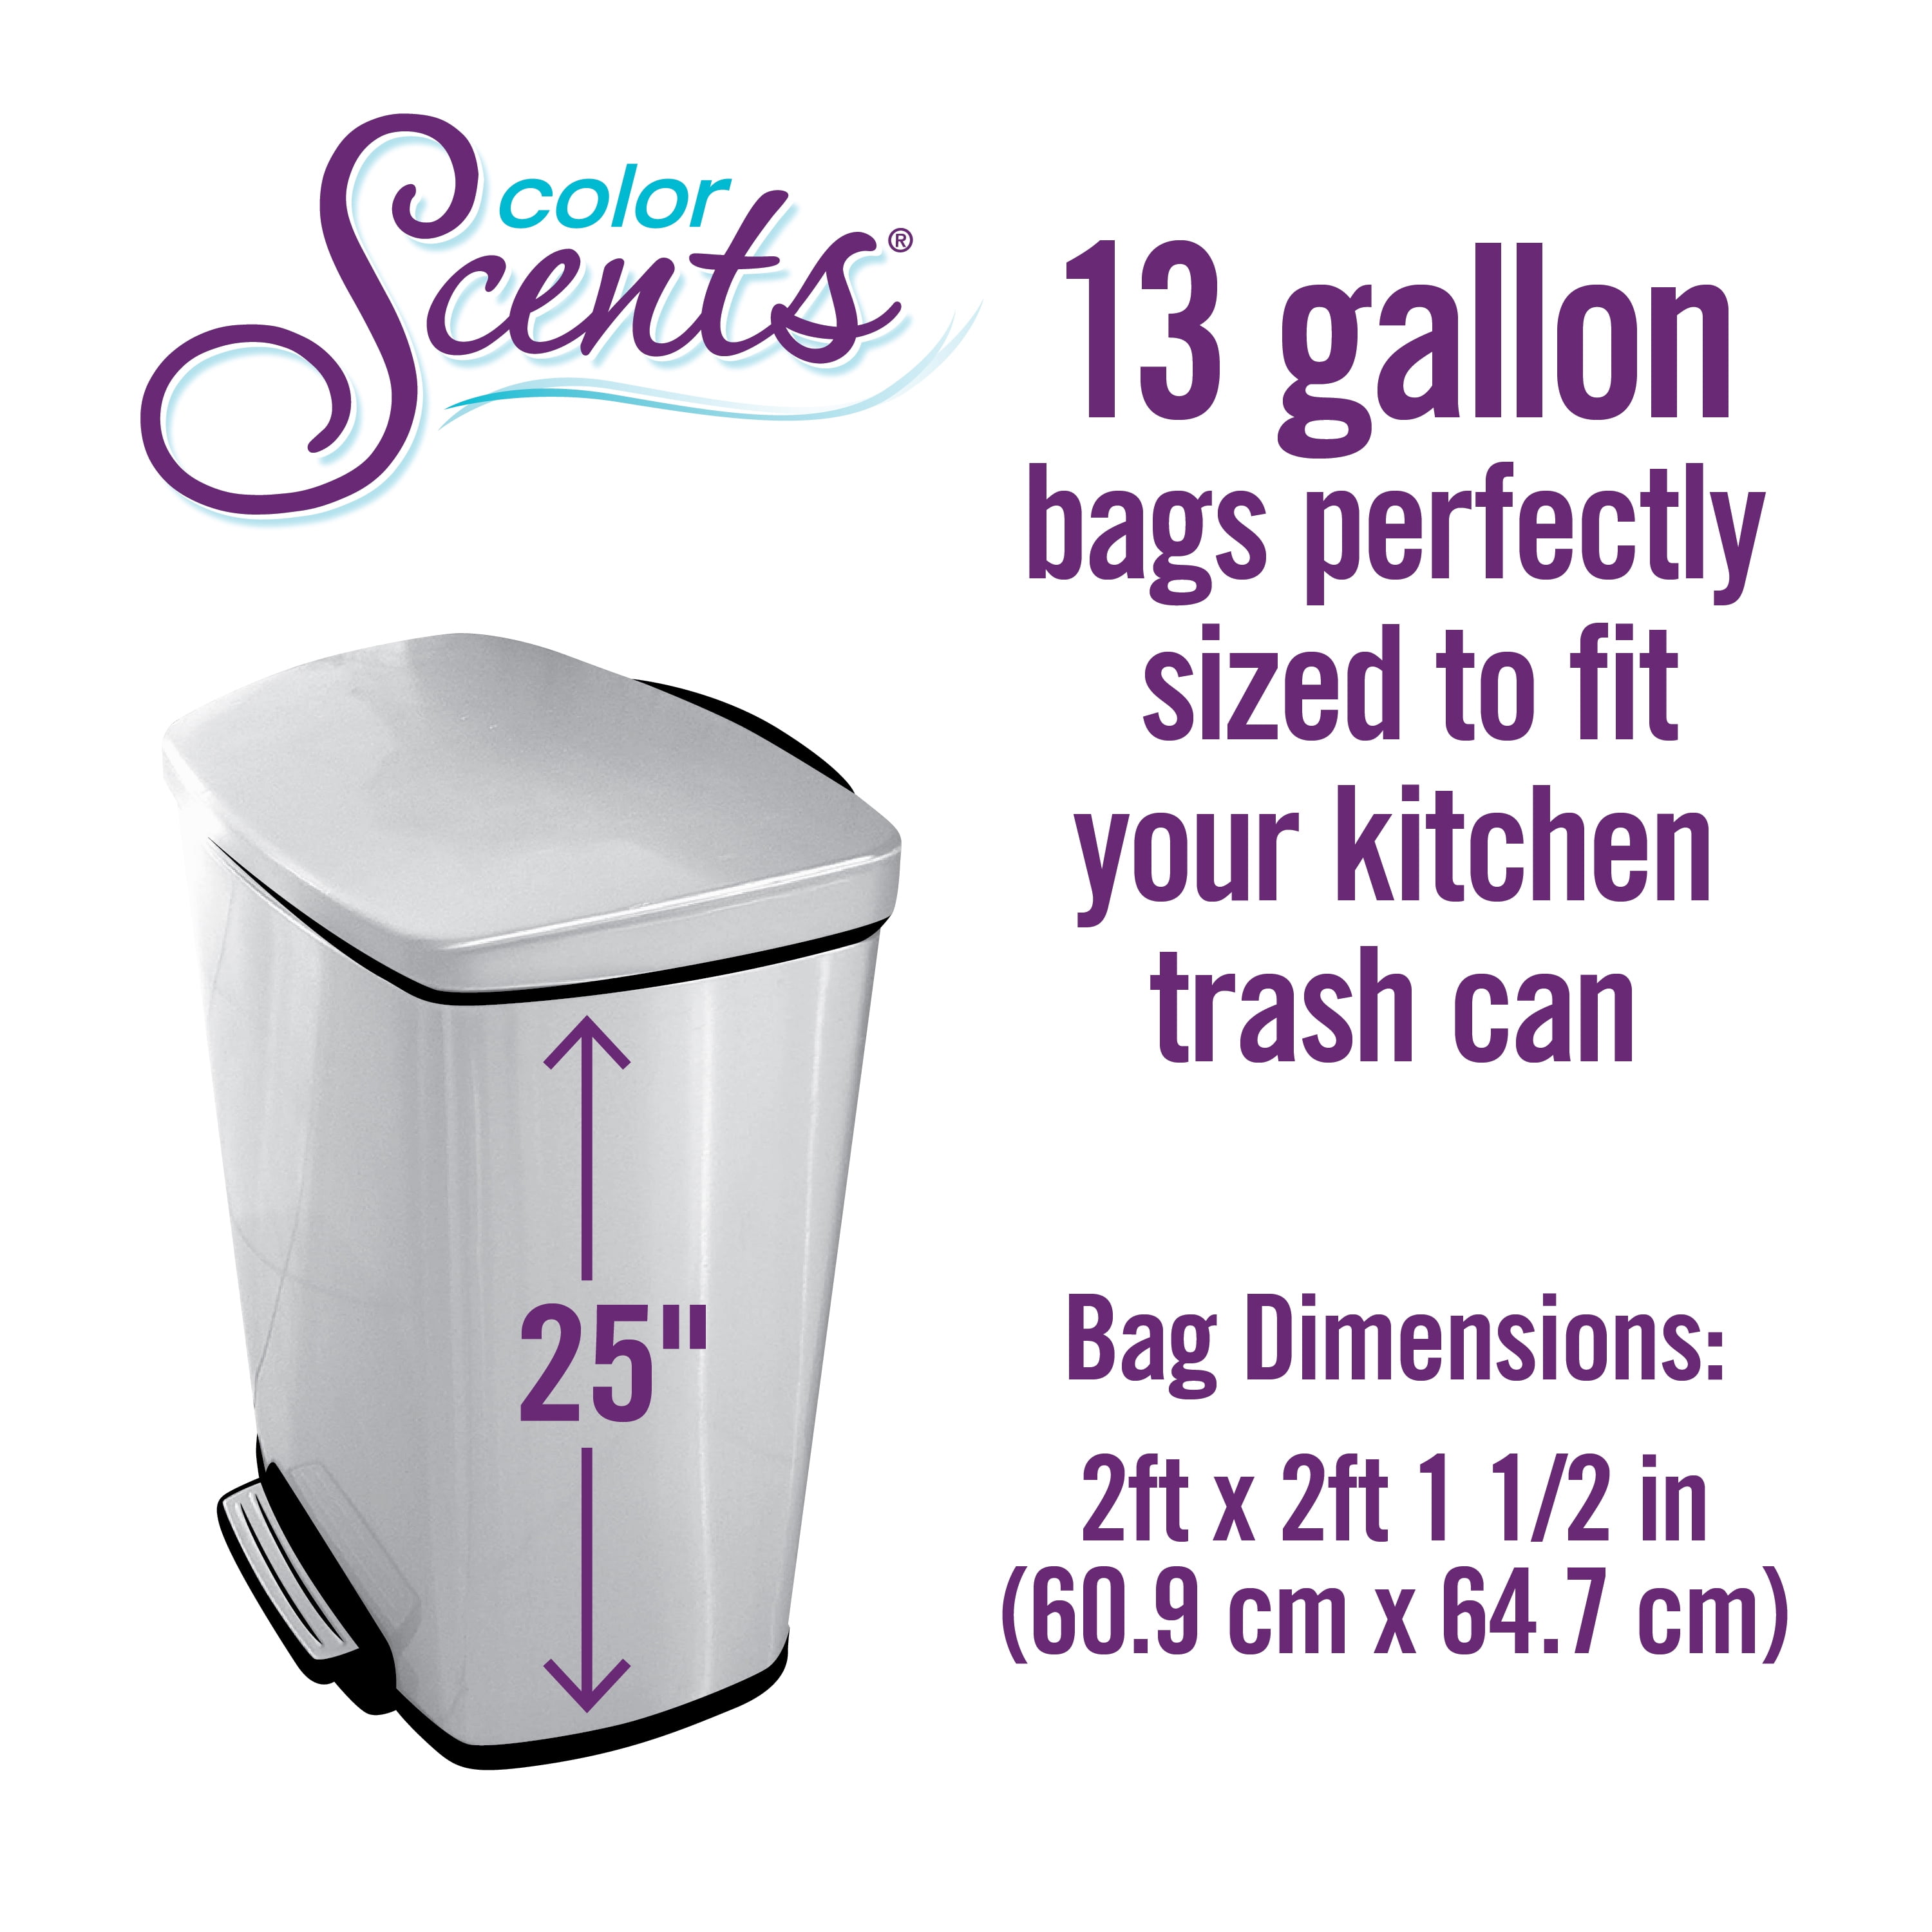 New Scented Garbage Trash Bags 4, 7, 8, or 13 Gallon - Rose